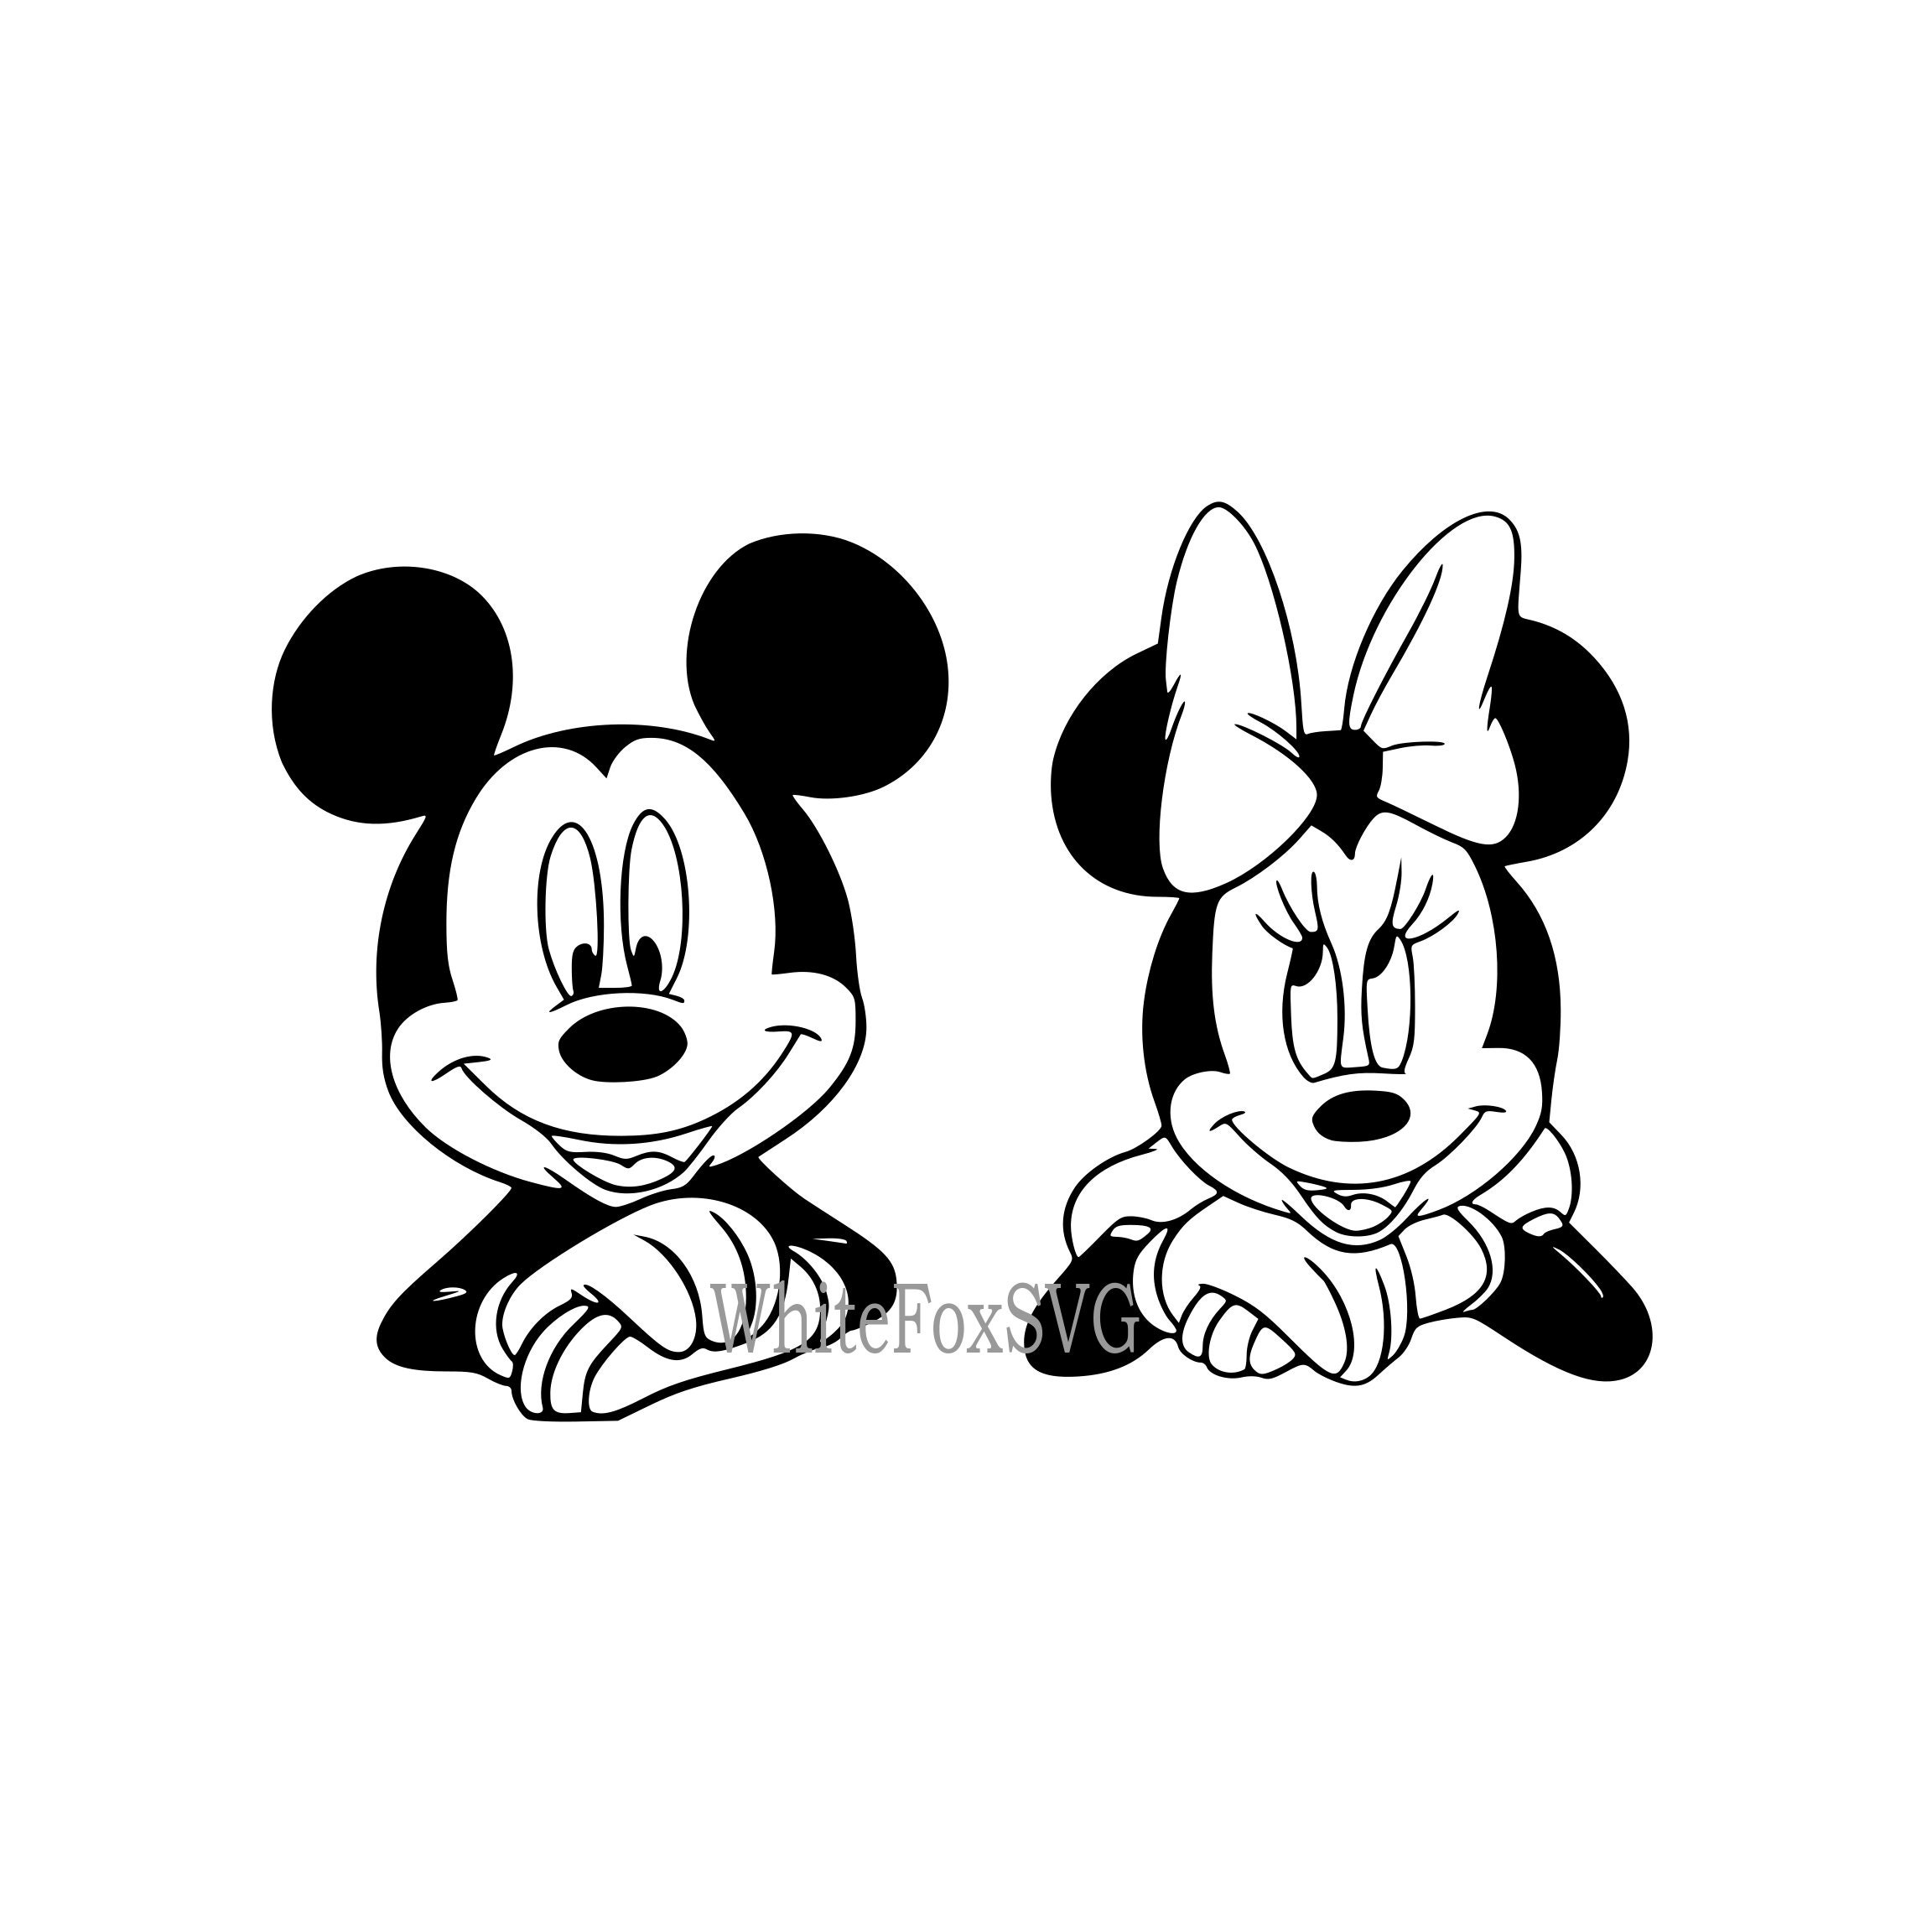 Download Mickey Mouse svg Minnie Mouse svg cute Disney characters ...